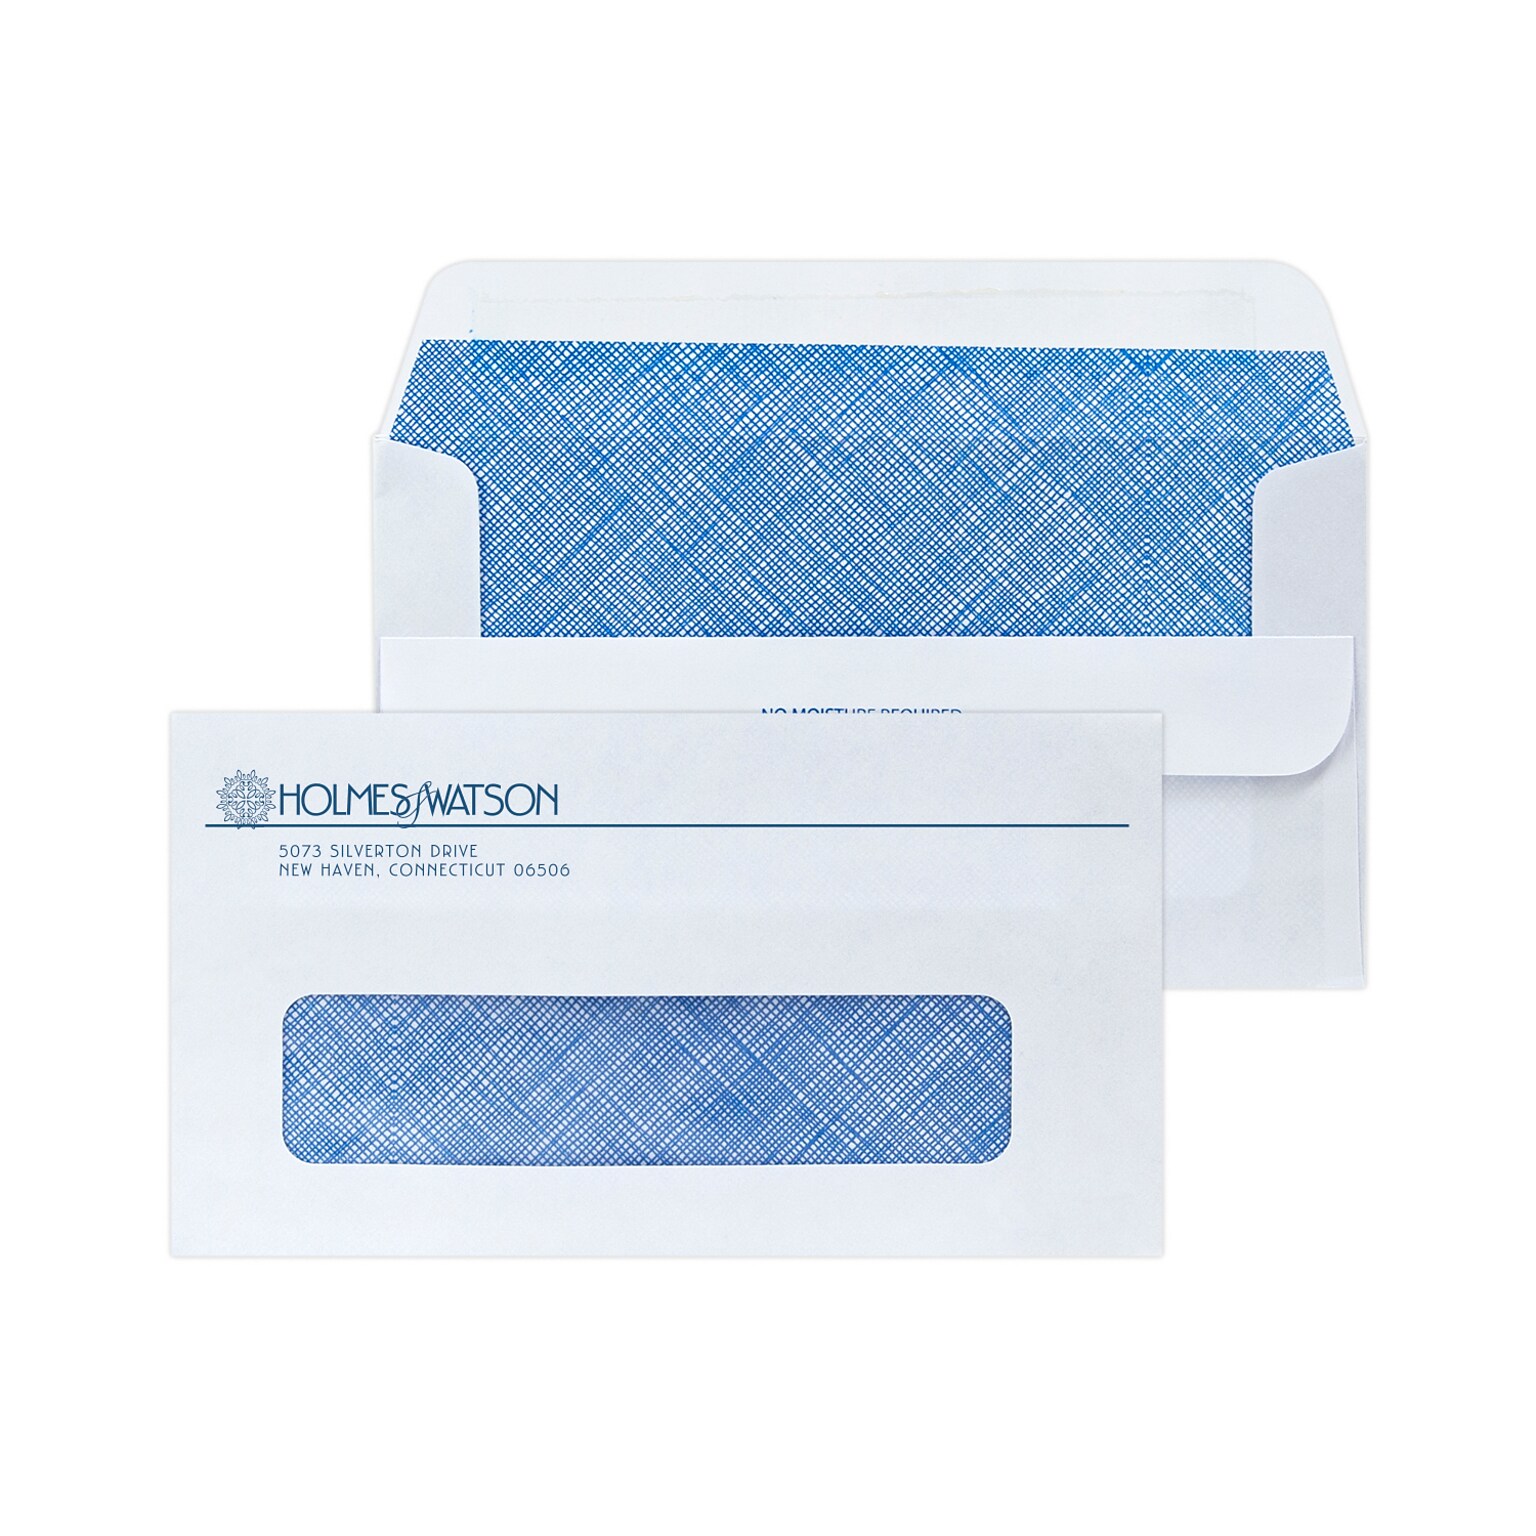 Custom #6-3/4 Self Seal Window Envelopes with Security Tint, 3 5/8 x 6 1/2, 24# White Wove, 1 Custom Ink, 250 / Pack